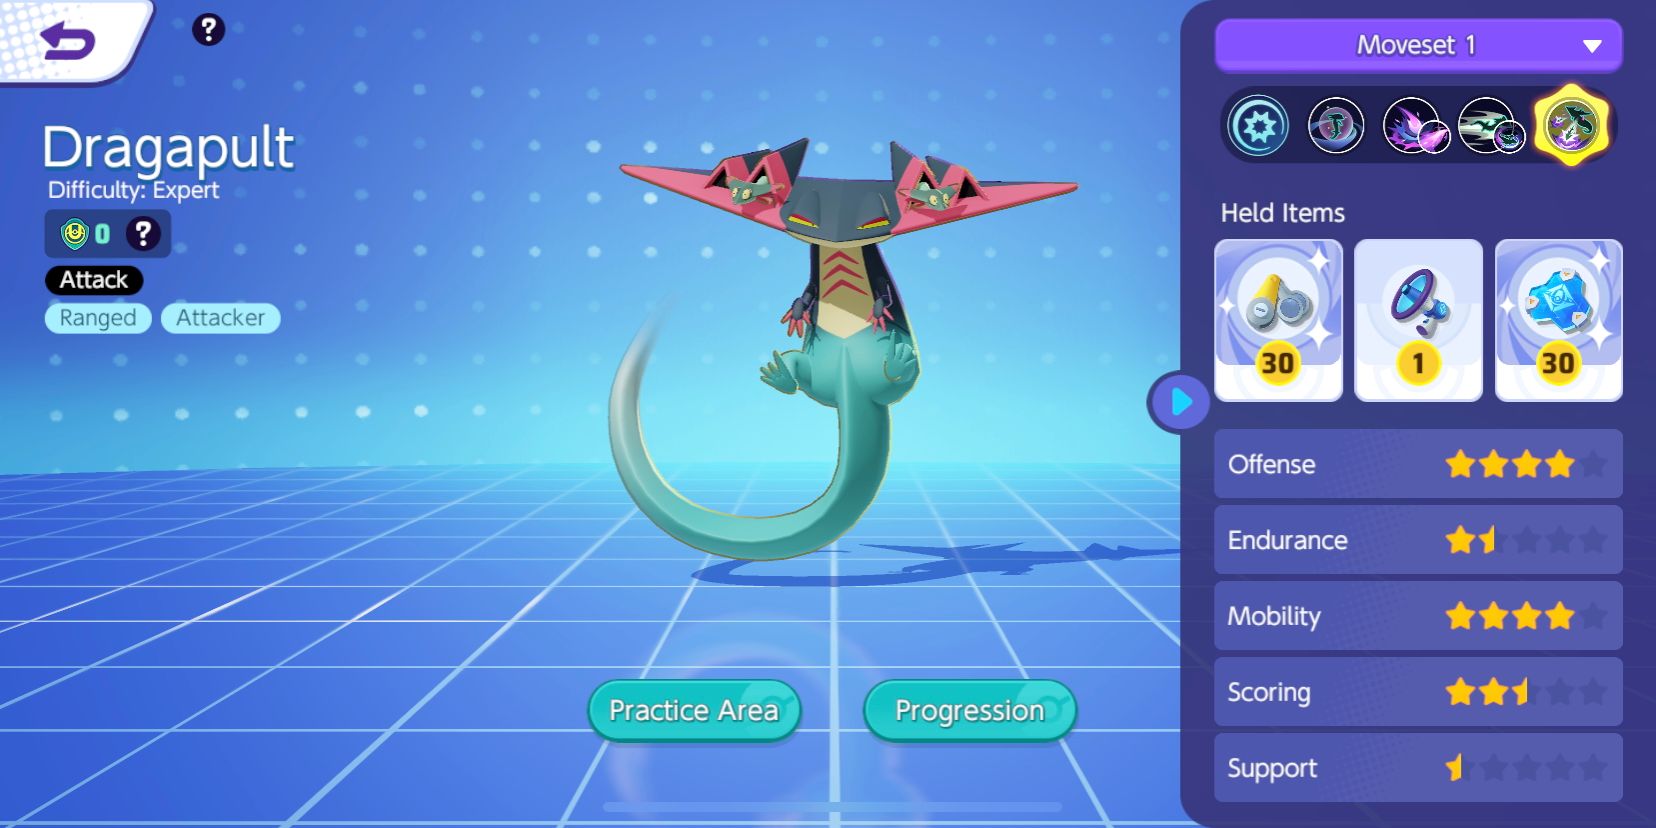 Dragapult from the Pokemon Unite Pokemon selection screen, showing its stats and Held Items